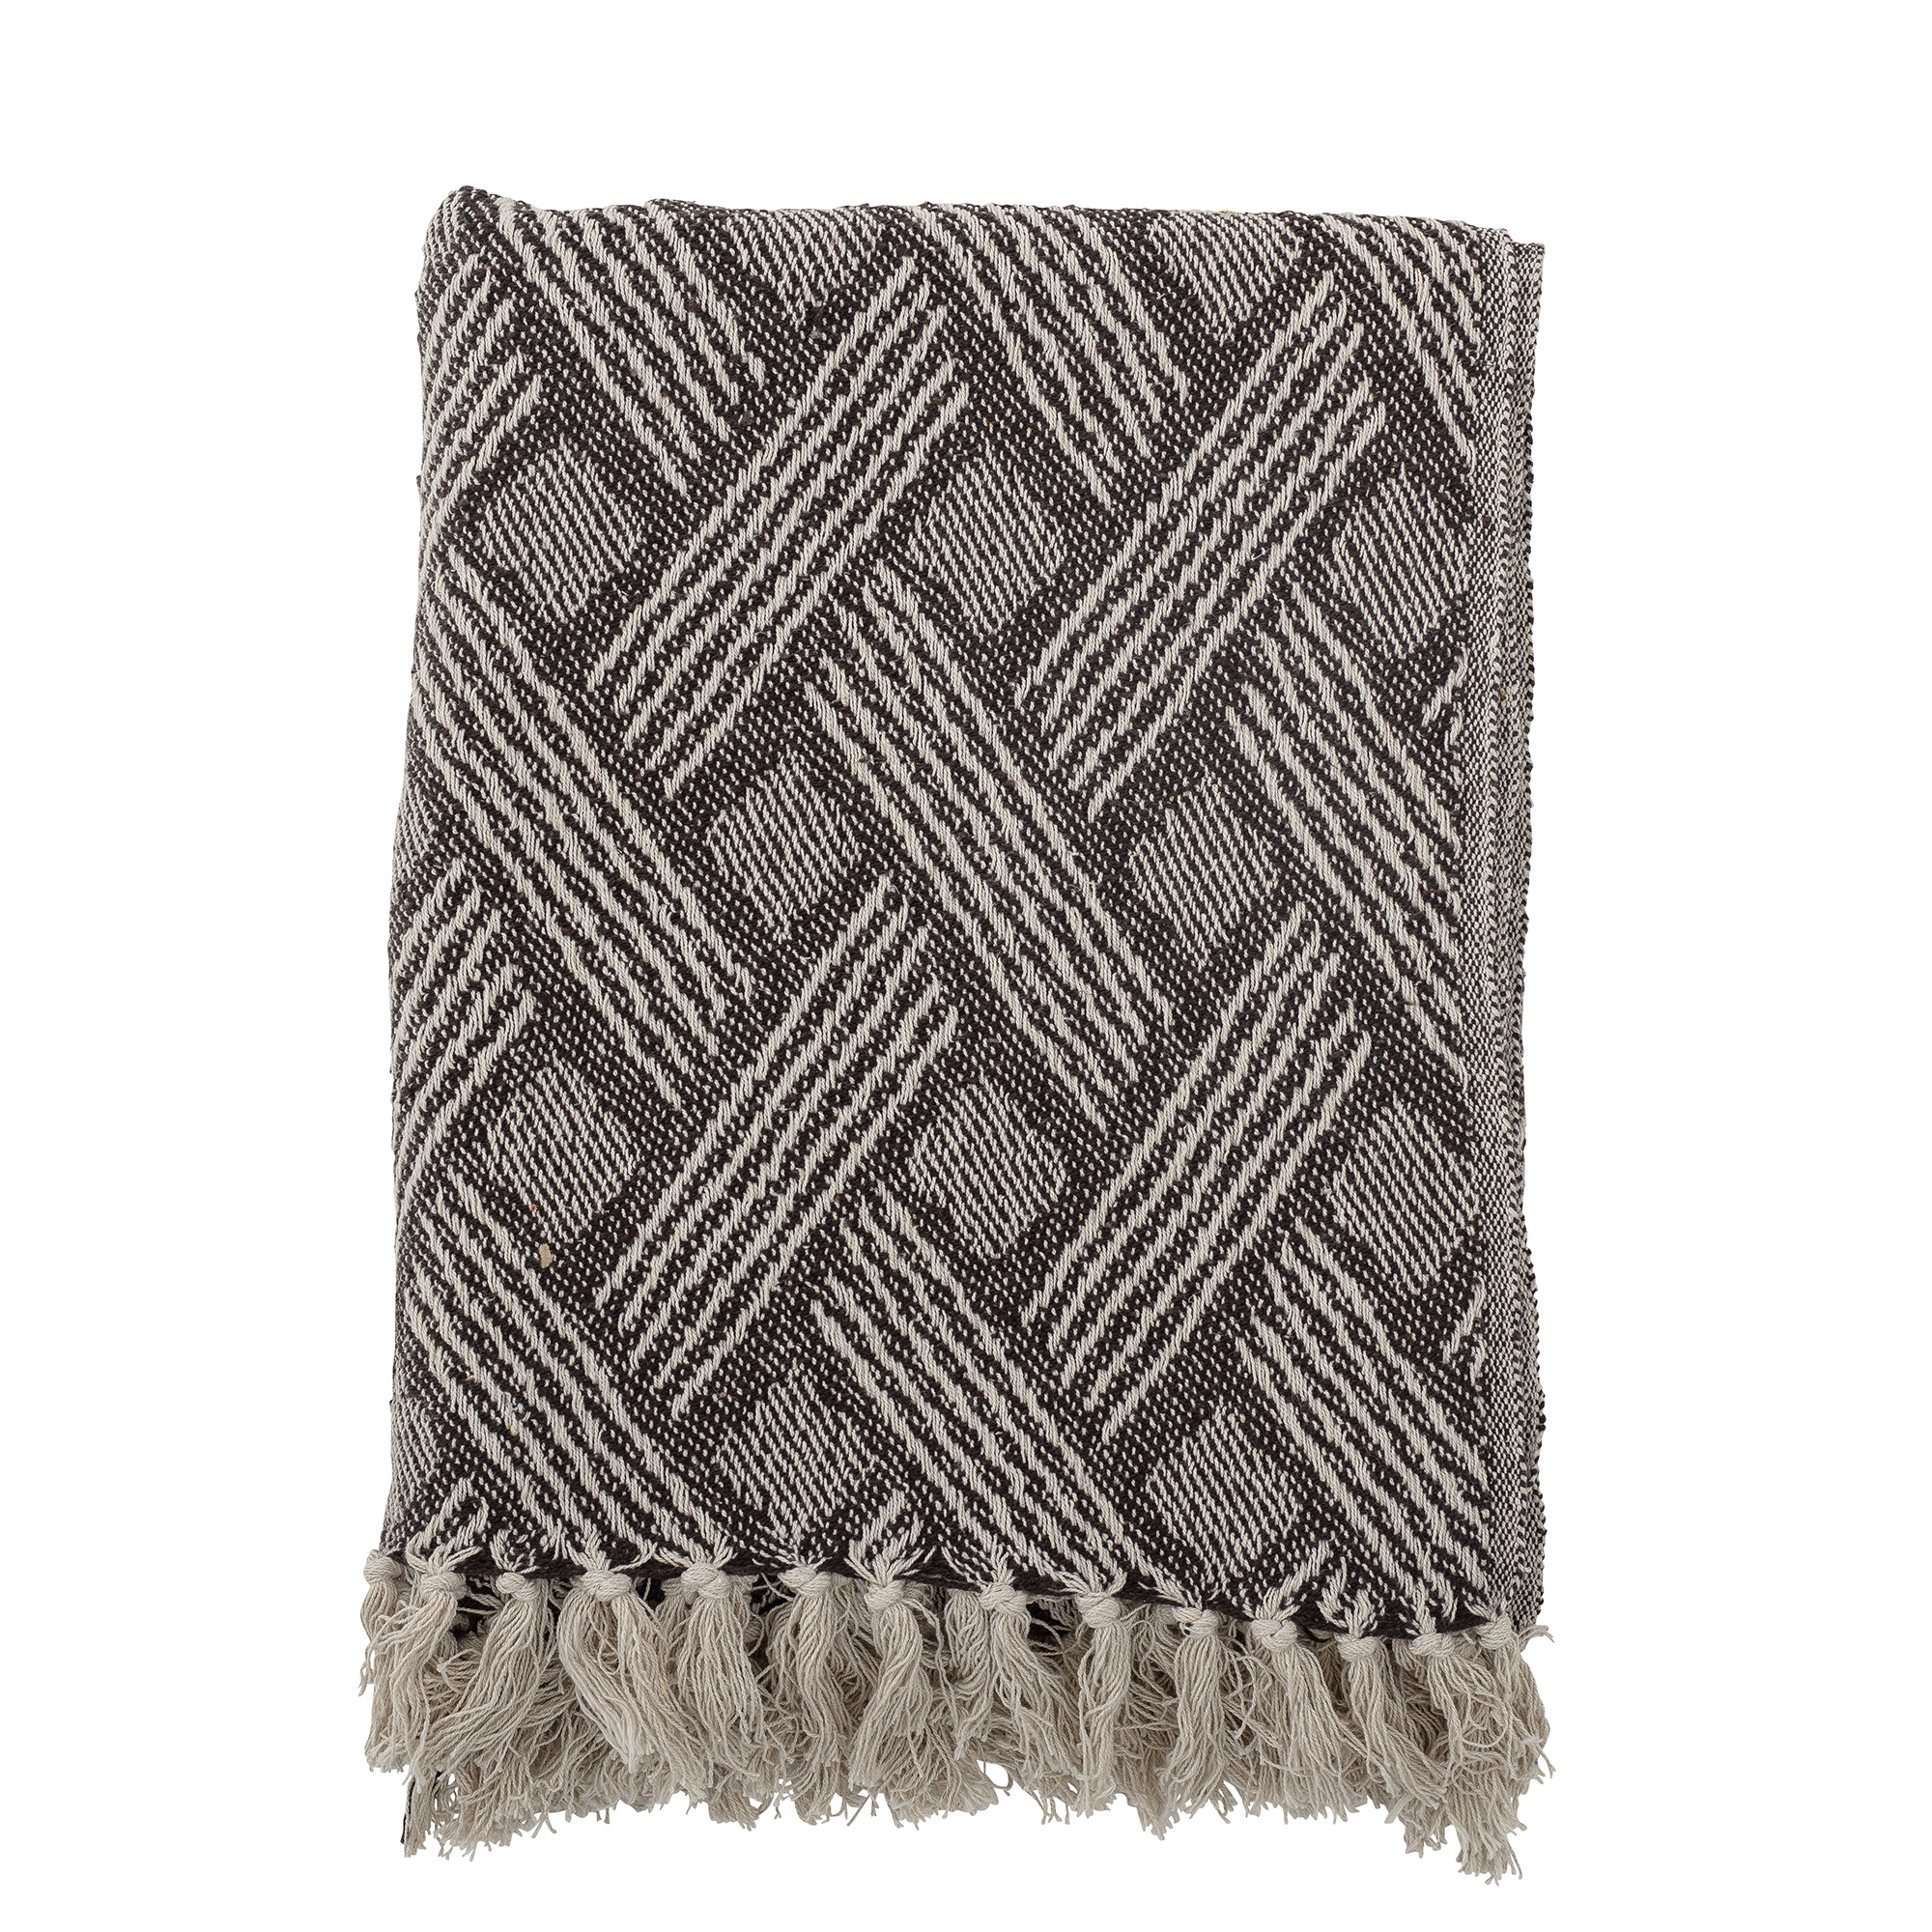 Bloomingville Recycled Cotton Blanket with Diagonal Lines and Fringes in Brown Colour